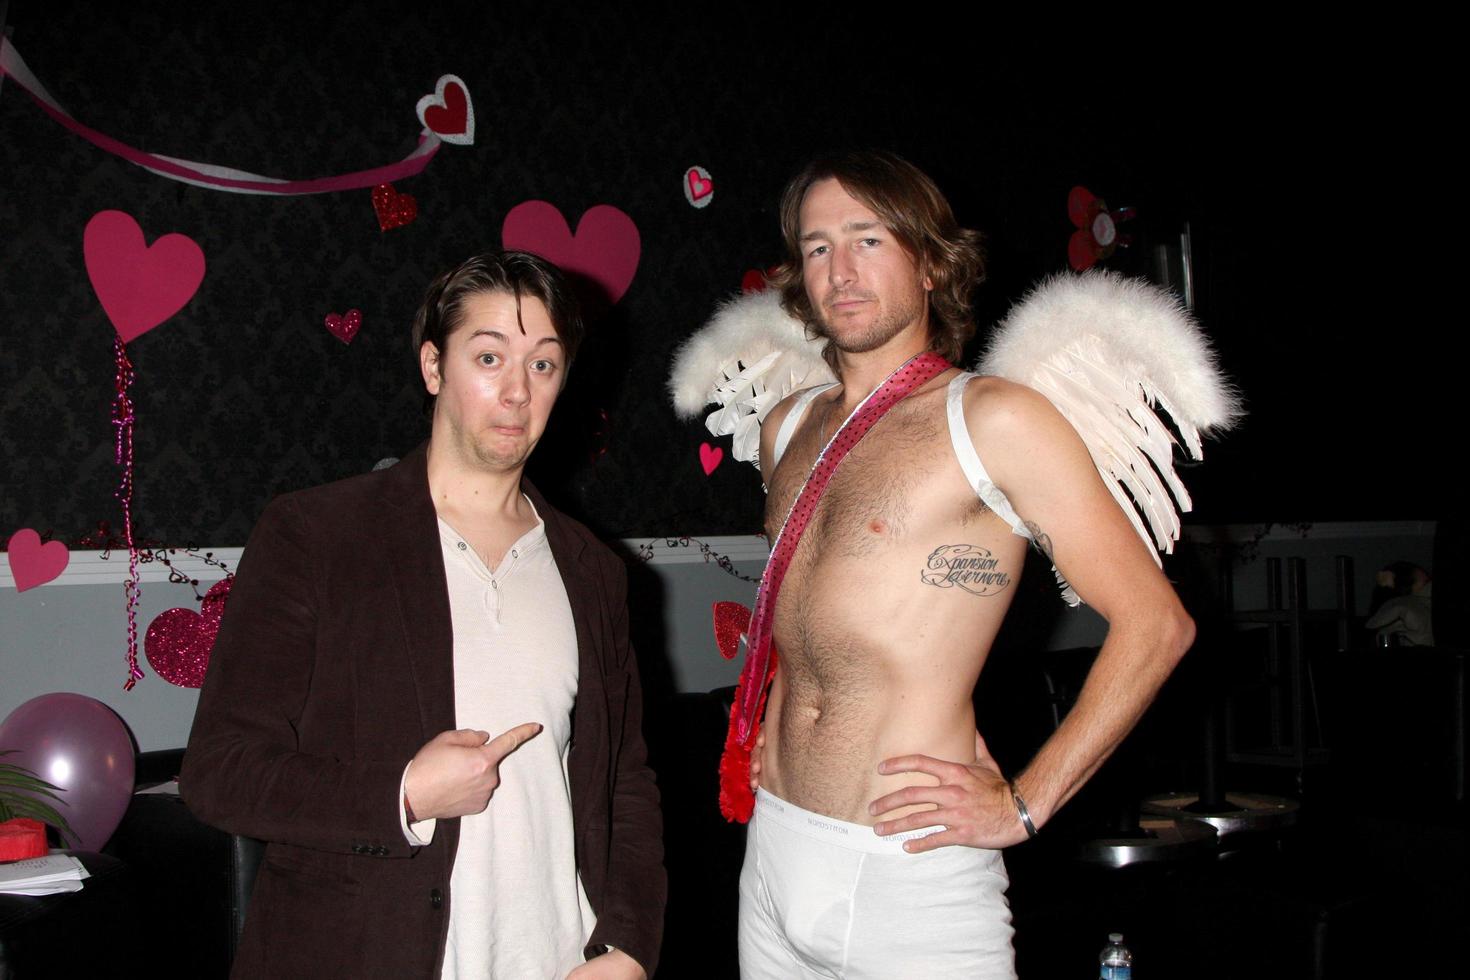 LOS ANGELES, DEC 17 - Bradford Anderson, Stephen Sullivan on set during the making of the movie Cupid and Eros  at The Good Nite Bar on December 17, 2010 in No Hollywood, CA photo